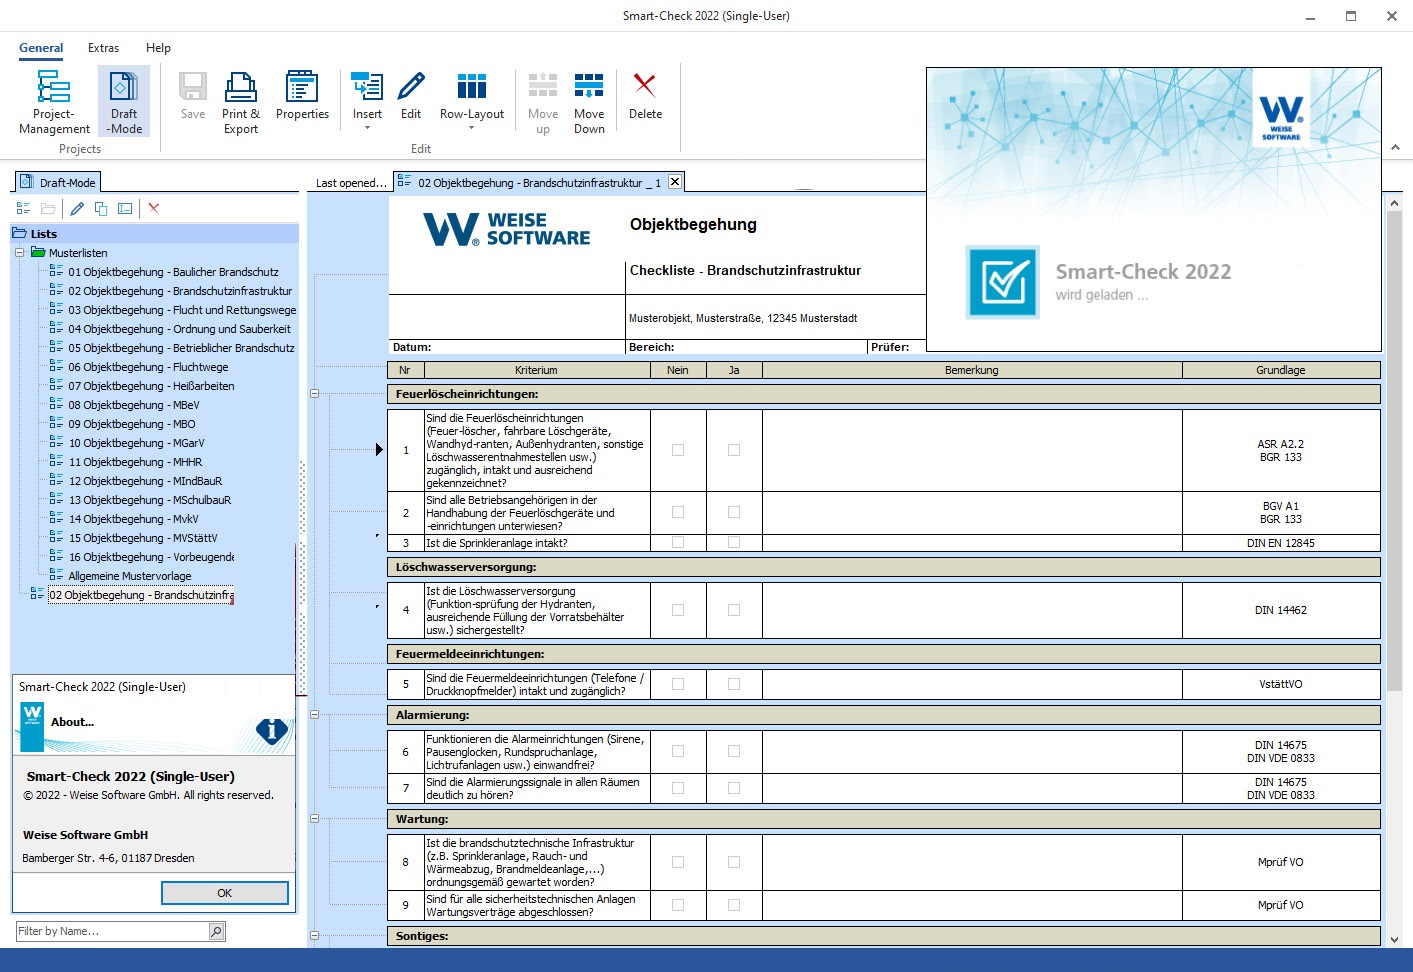 Working with Weise Smart-Check 2022 2022.4.0.0